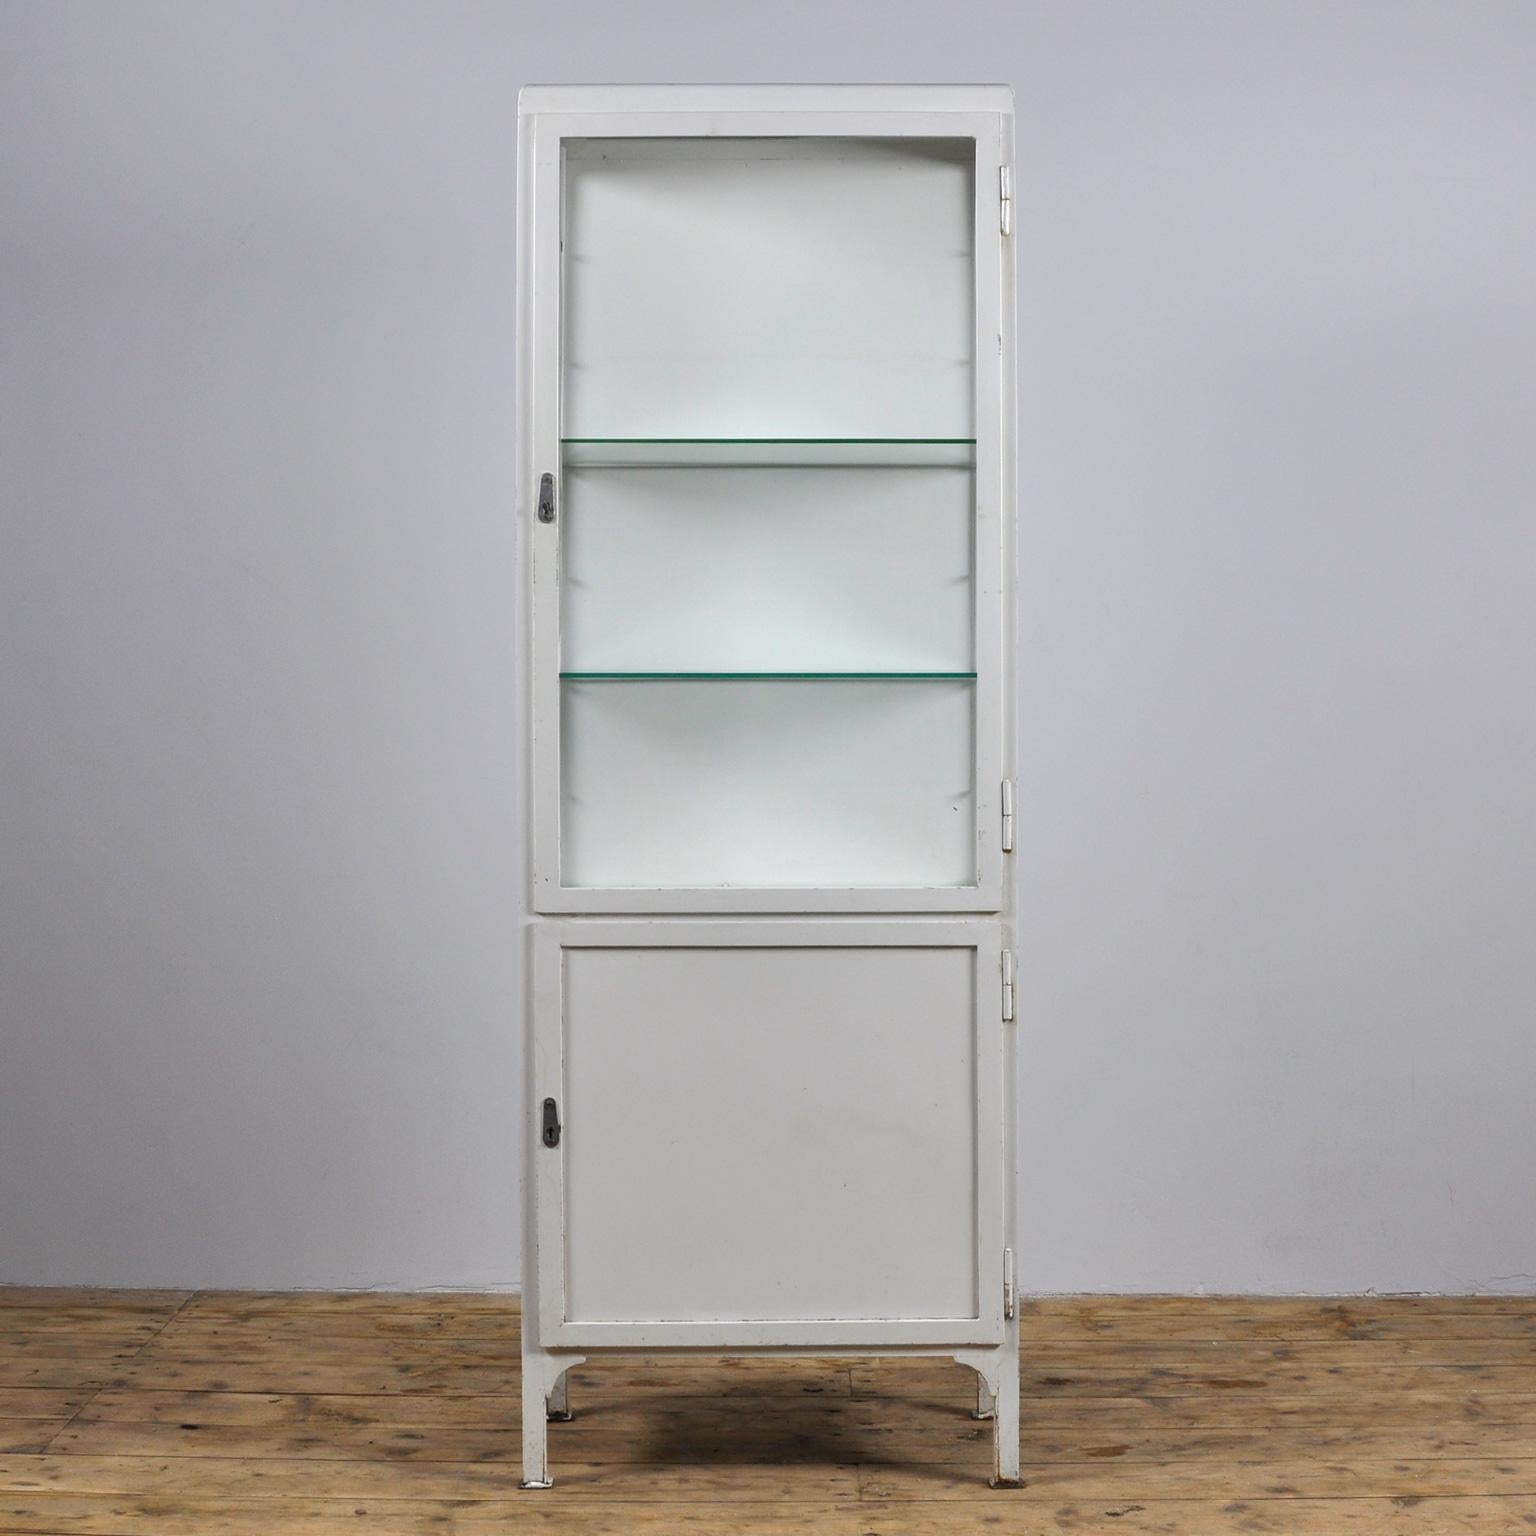 Medical cabinet from the Czech republic, produced in the 1960s. The cabinet is made of iron and (antique) glass. With two (adjustable) glass shelves. Behind the bottom door a steel shelf.